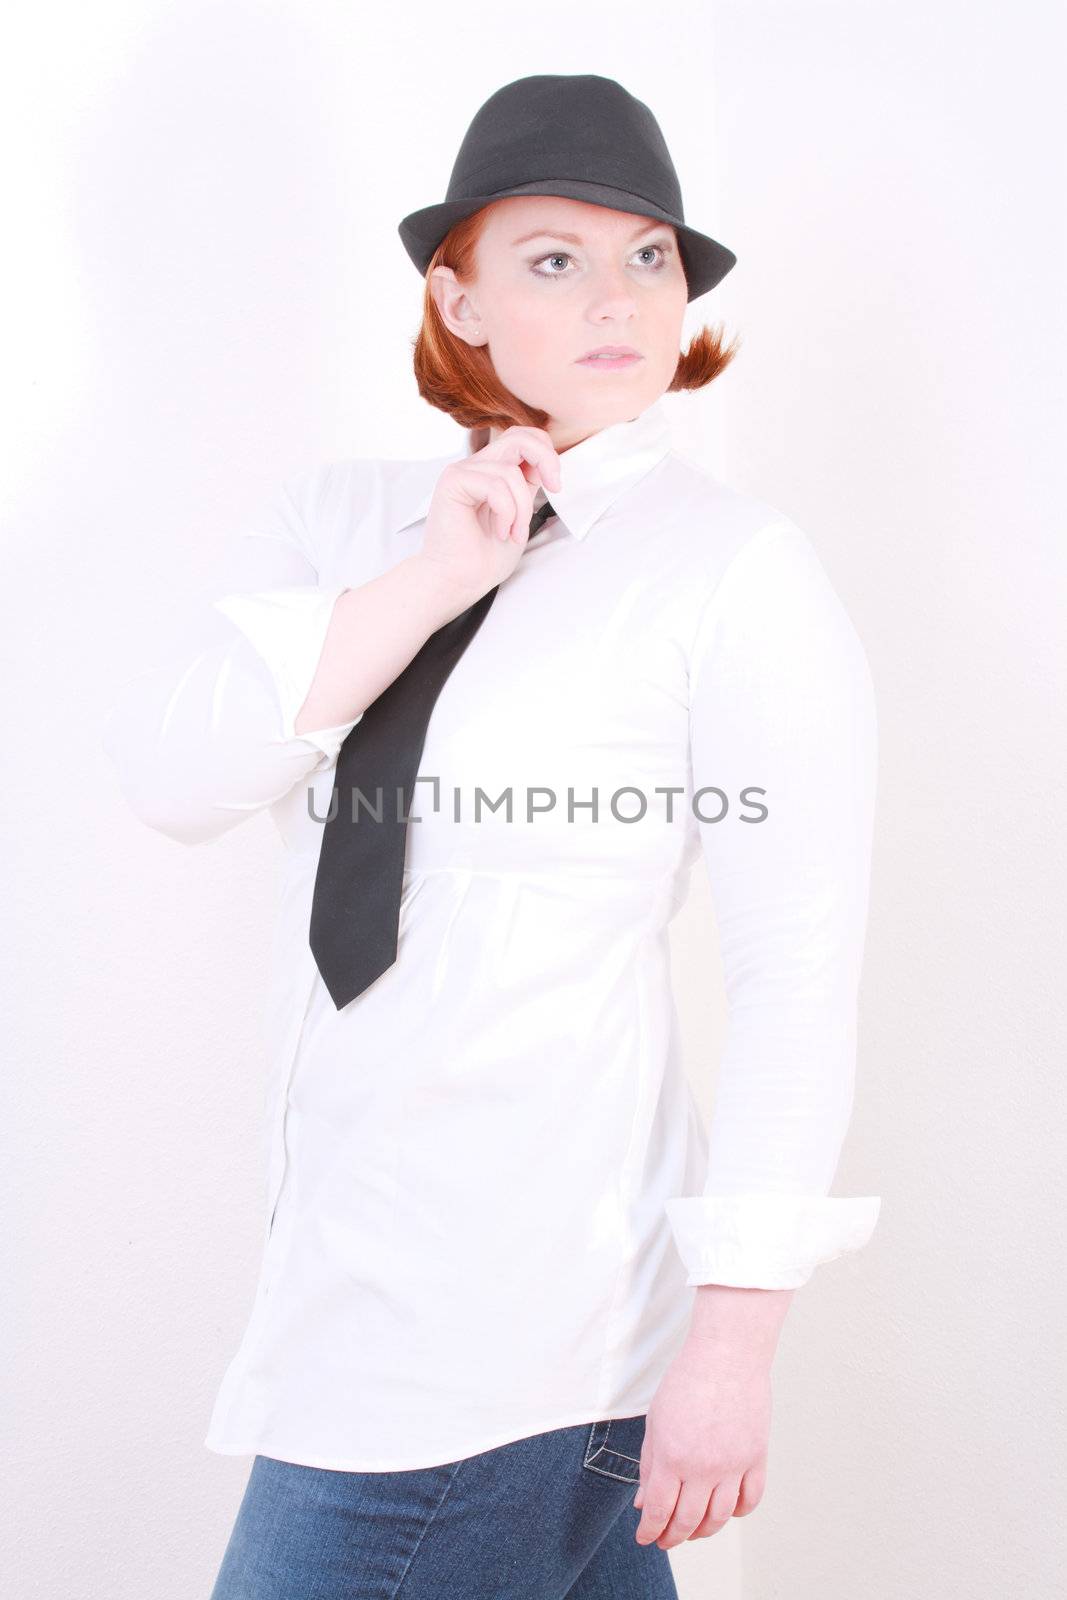 Plus Size Model in white blouse with tie and hat